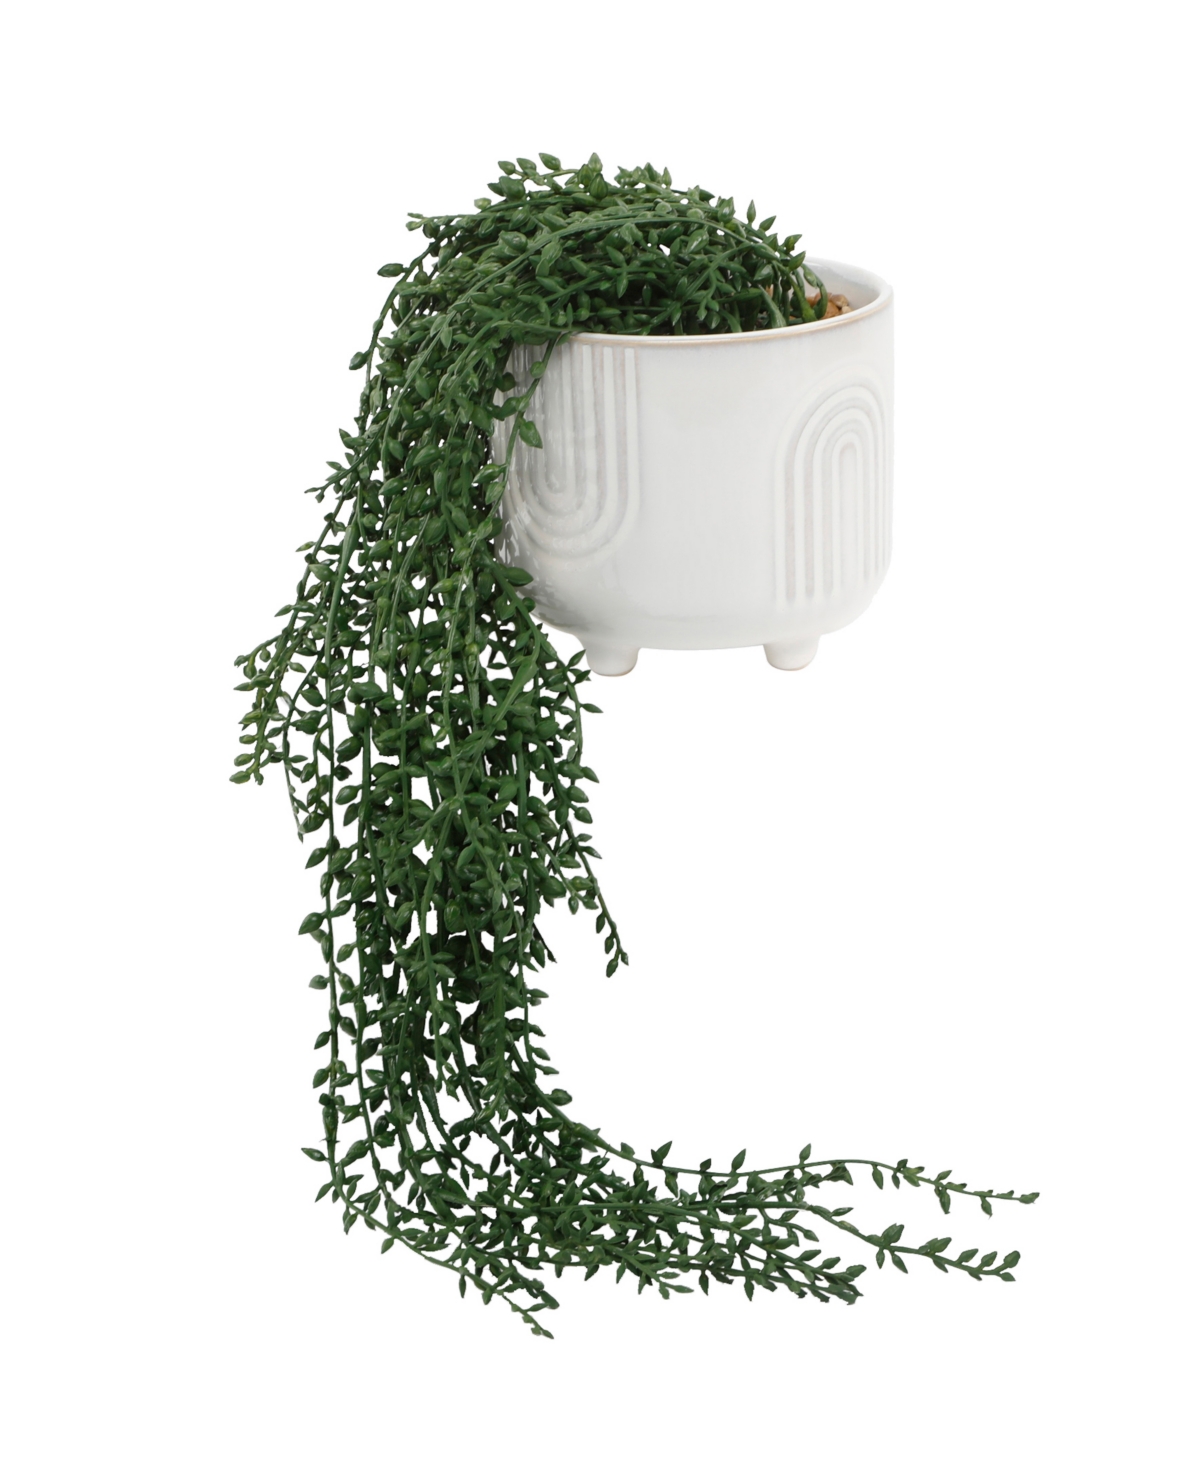 String of Beads in New Rainbow Ceramic Pot, 4.75" - White, Green